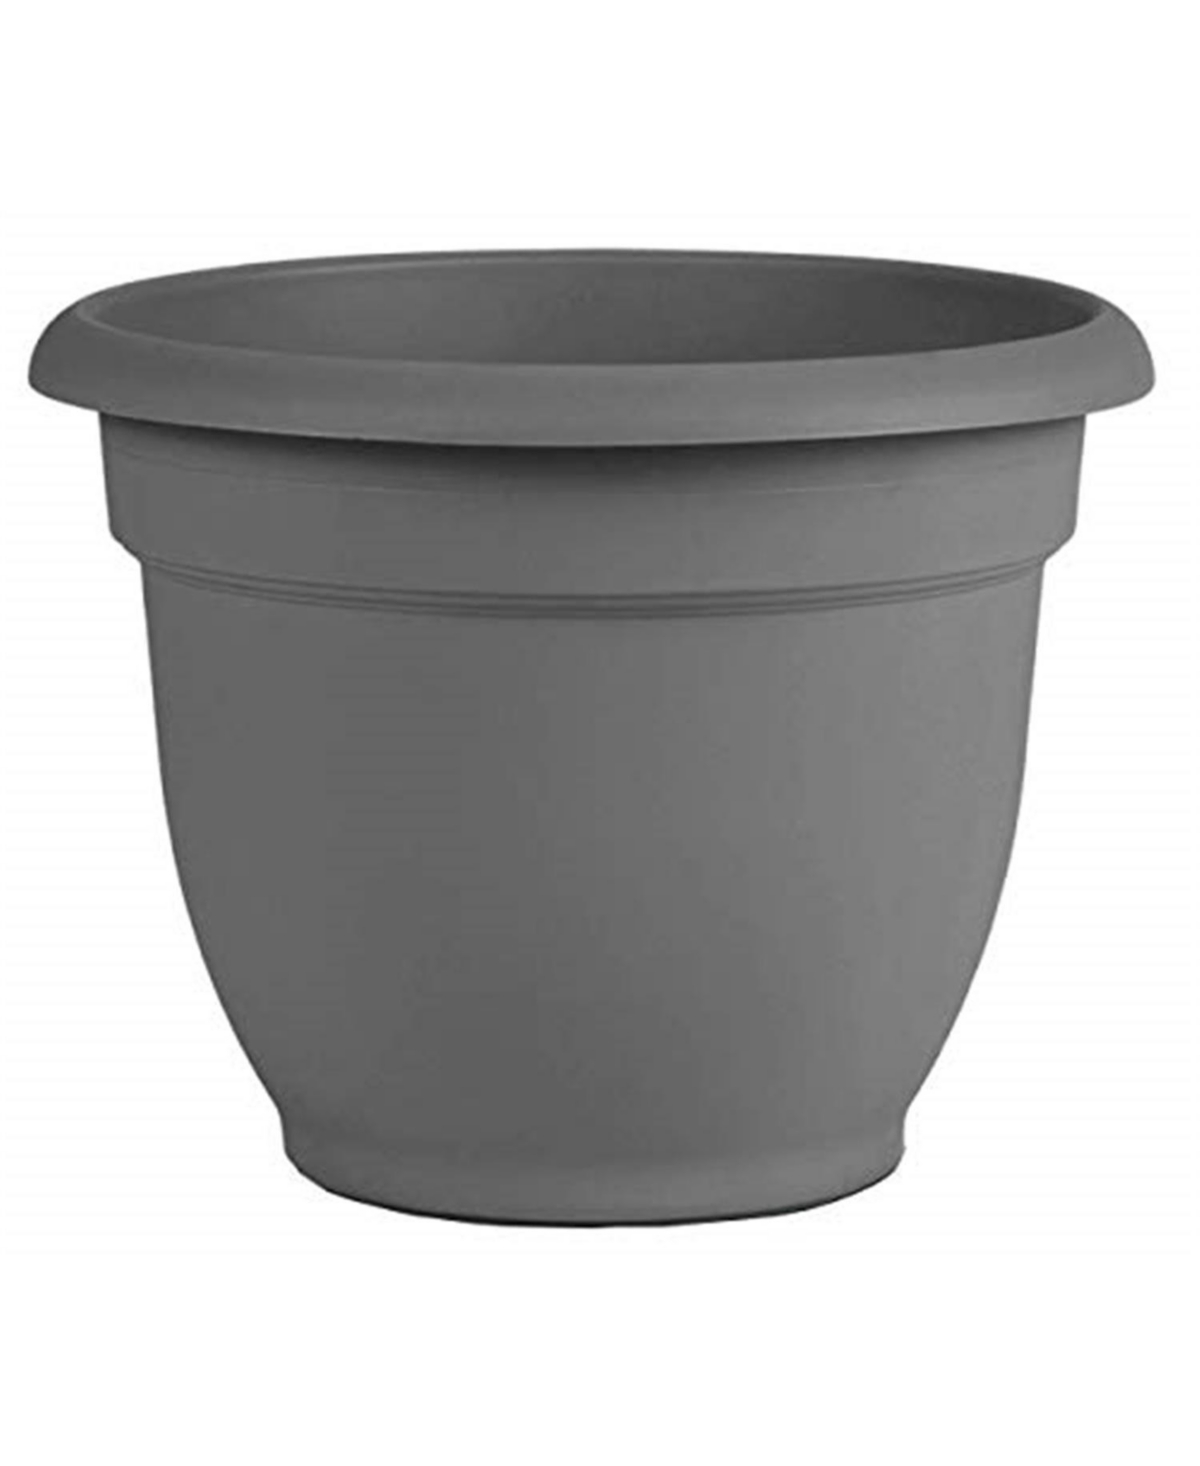 AP16908 Ariana Planter with Self-Watering Disk, Charcoal - 16 inches - Charcoal